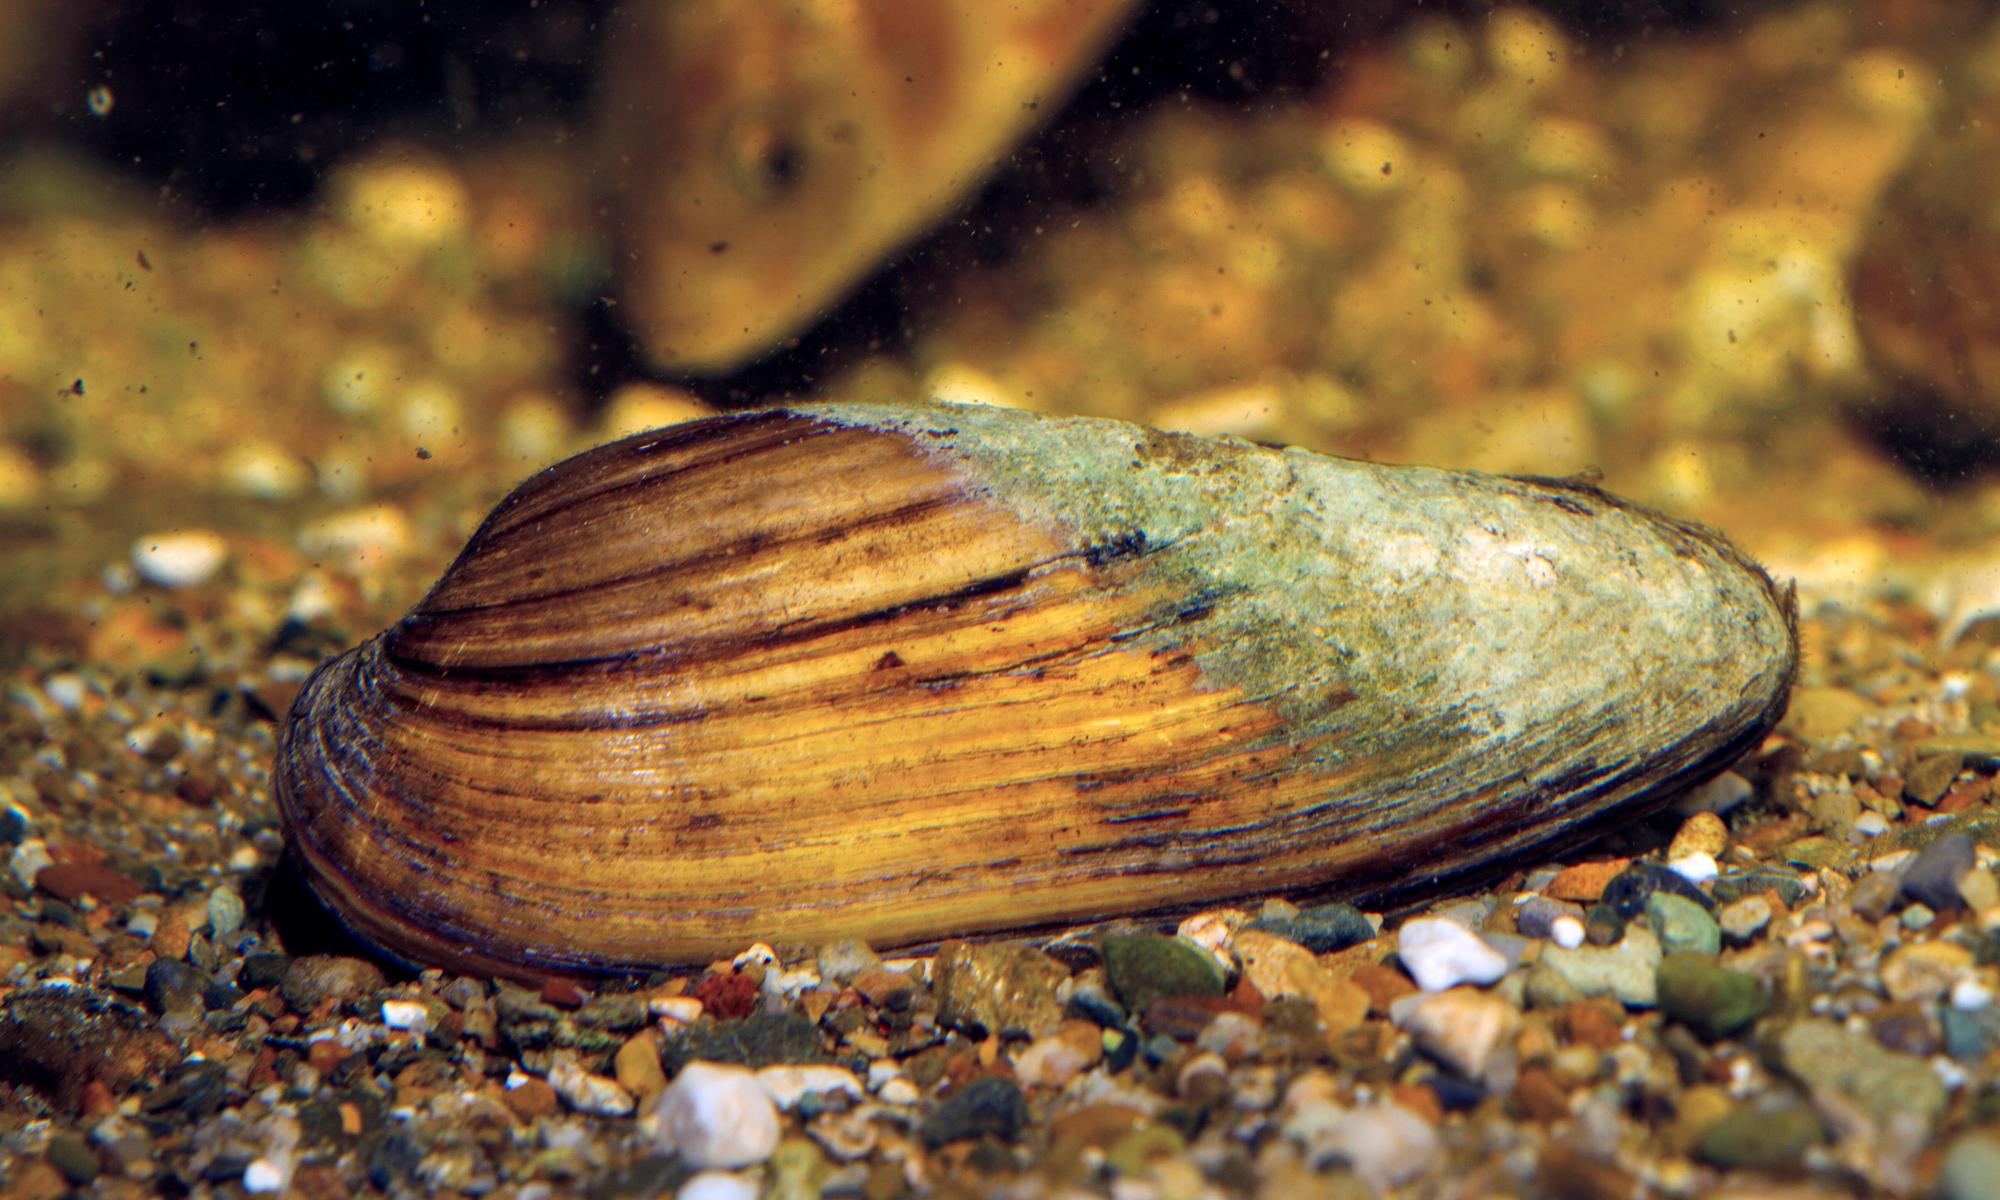 Native mussel numbers down almost 95% since 1960s, Thames survey finds